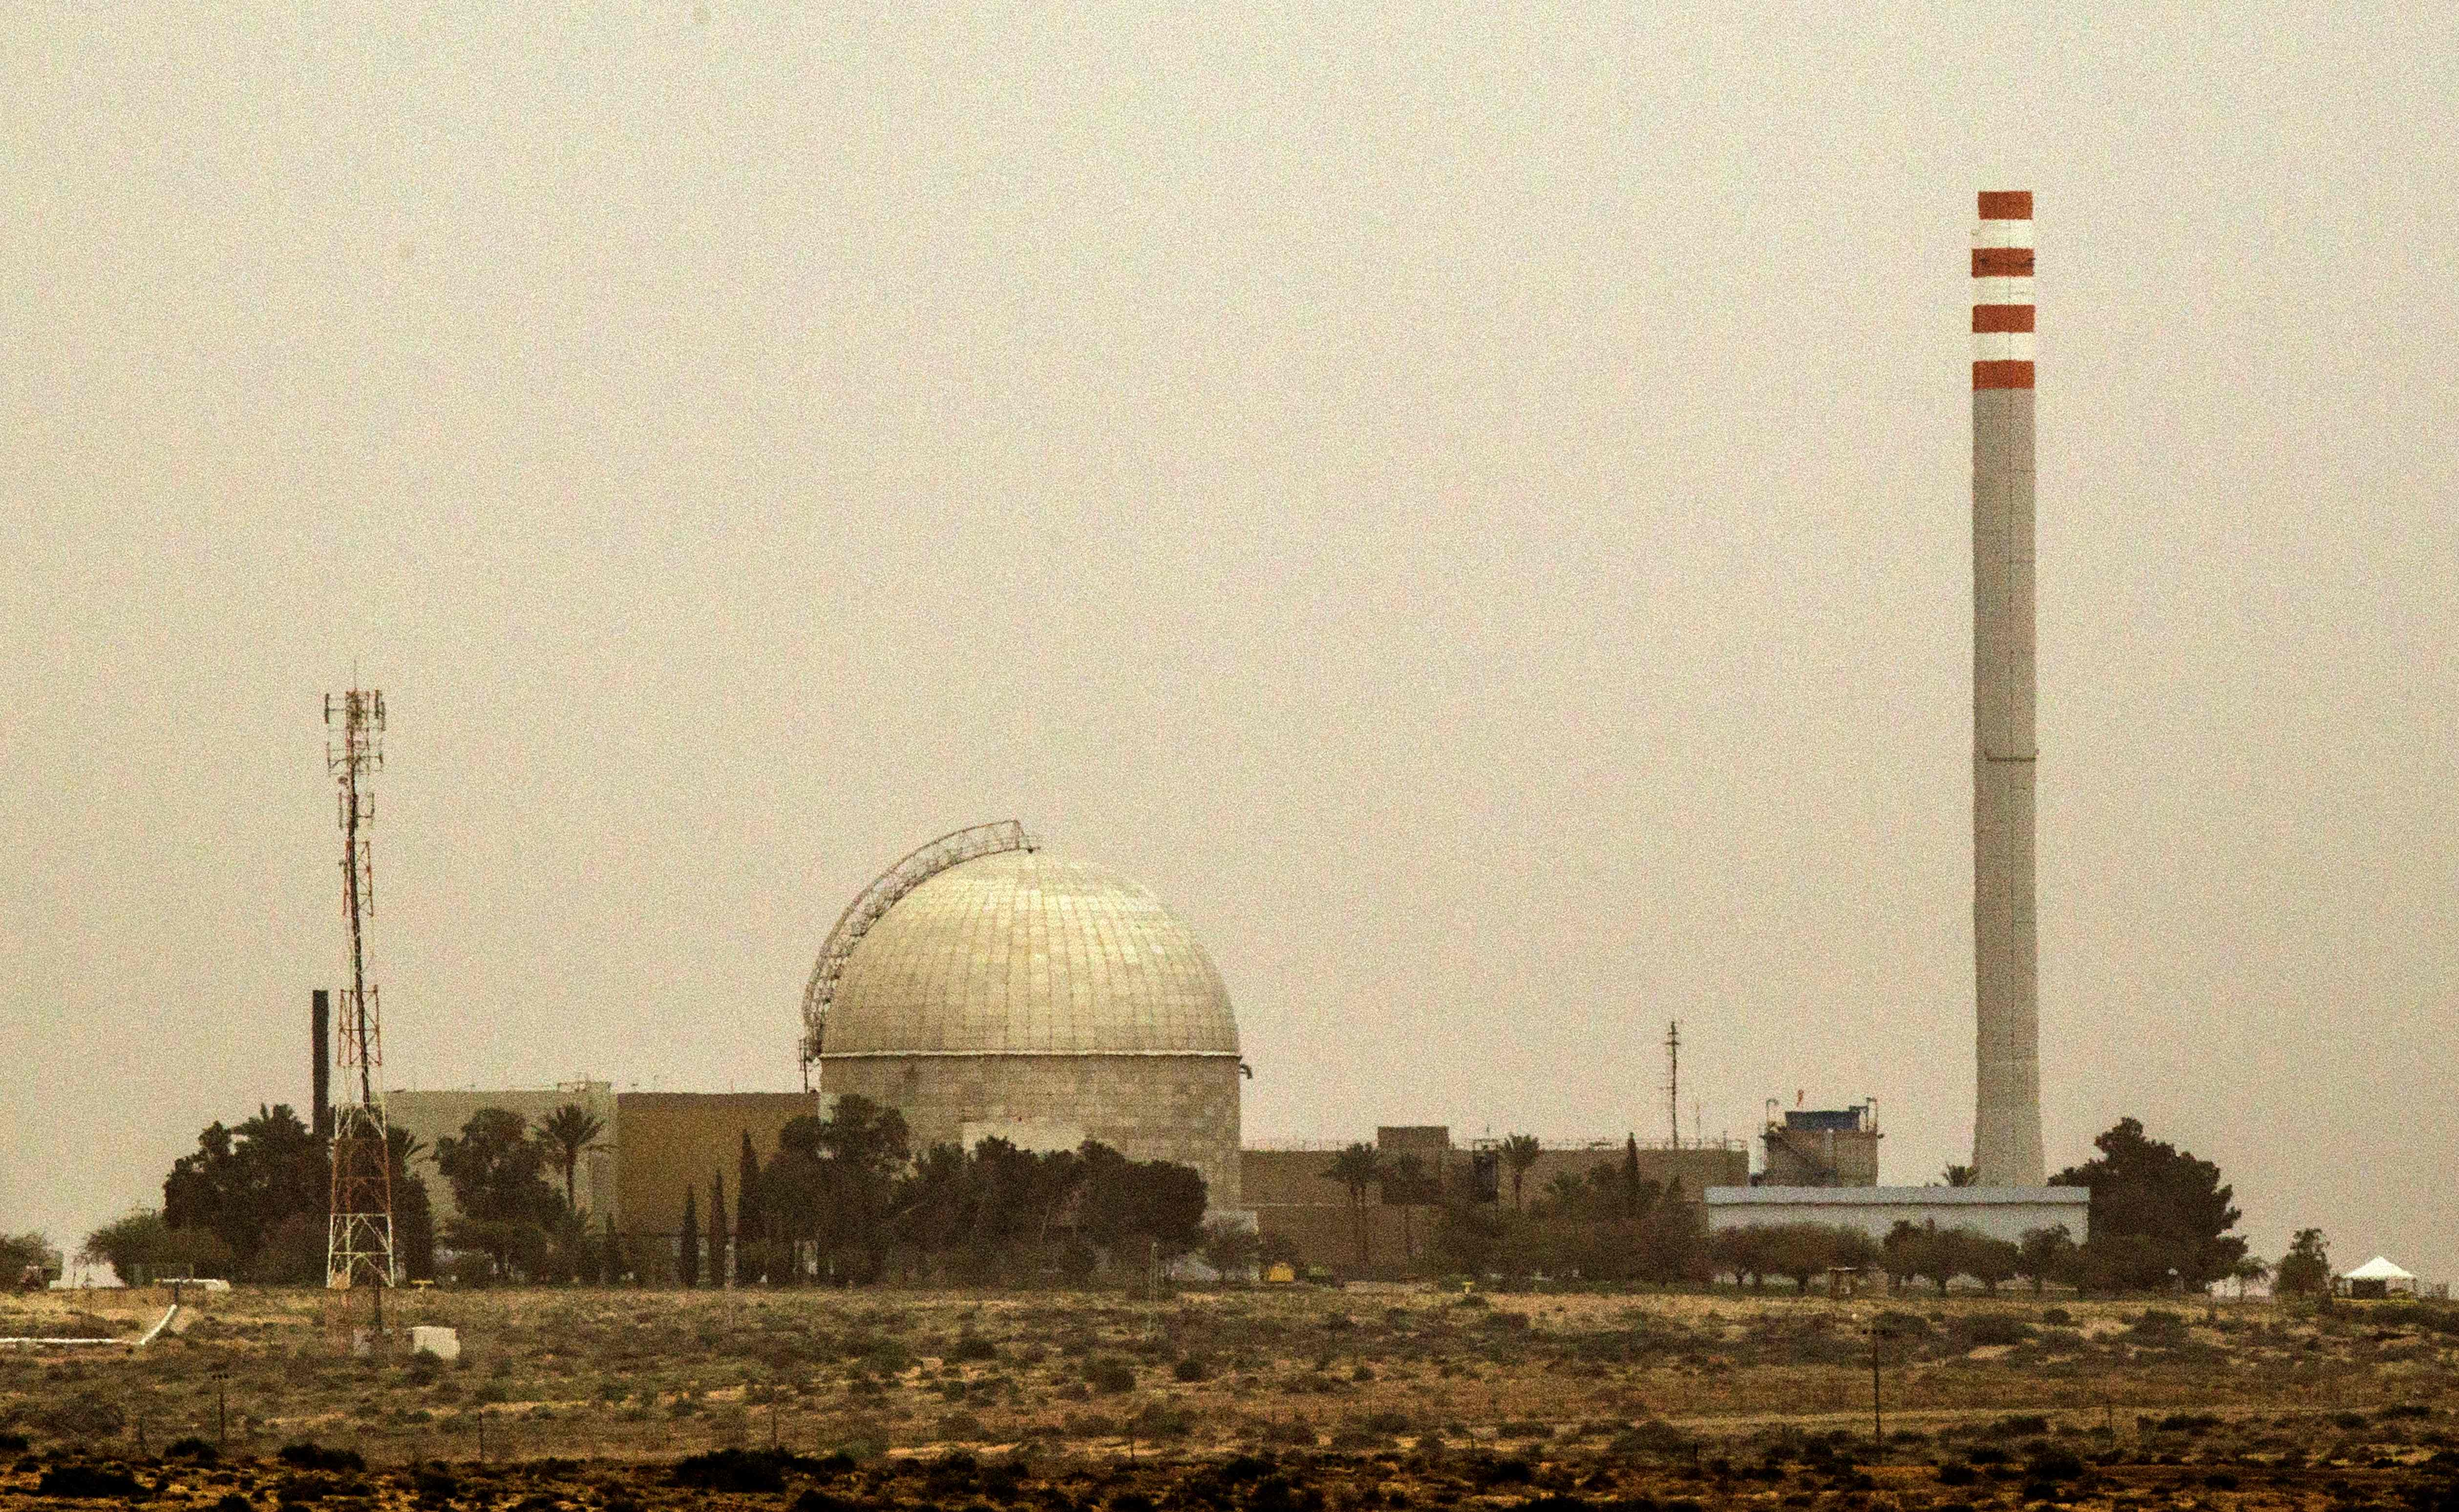 The missile came within 20 miles of the Dimona nuclear reactor in the southern Israeli Negev desert